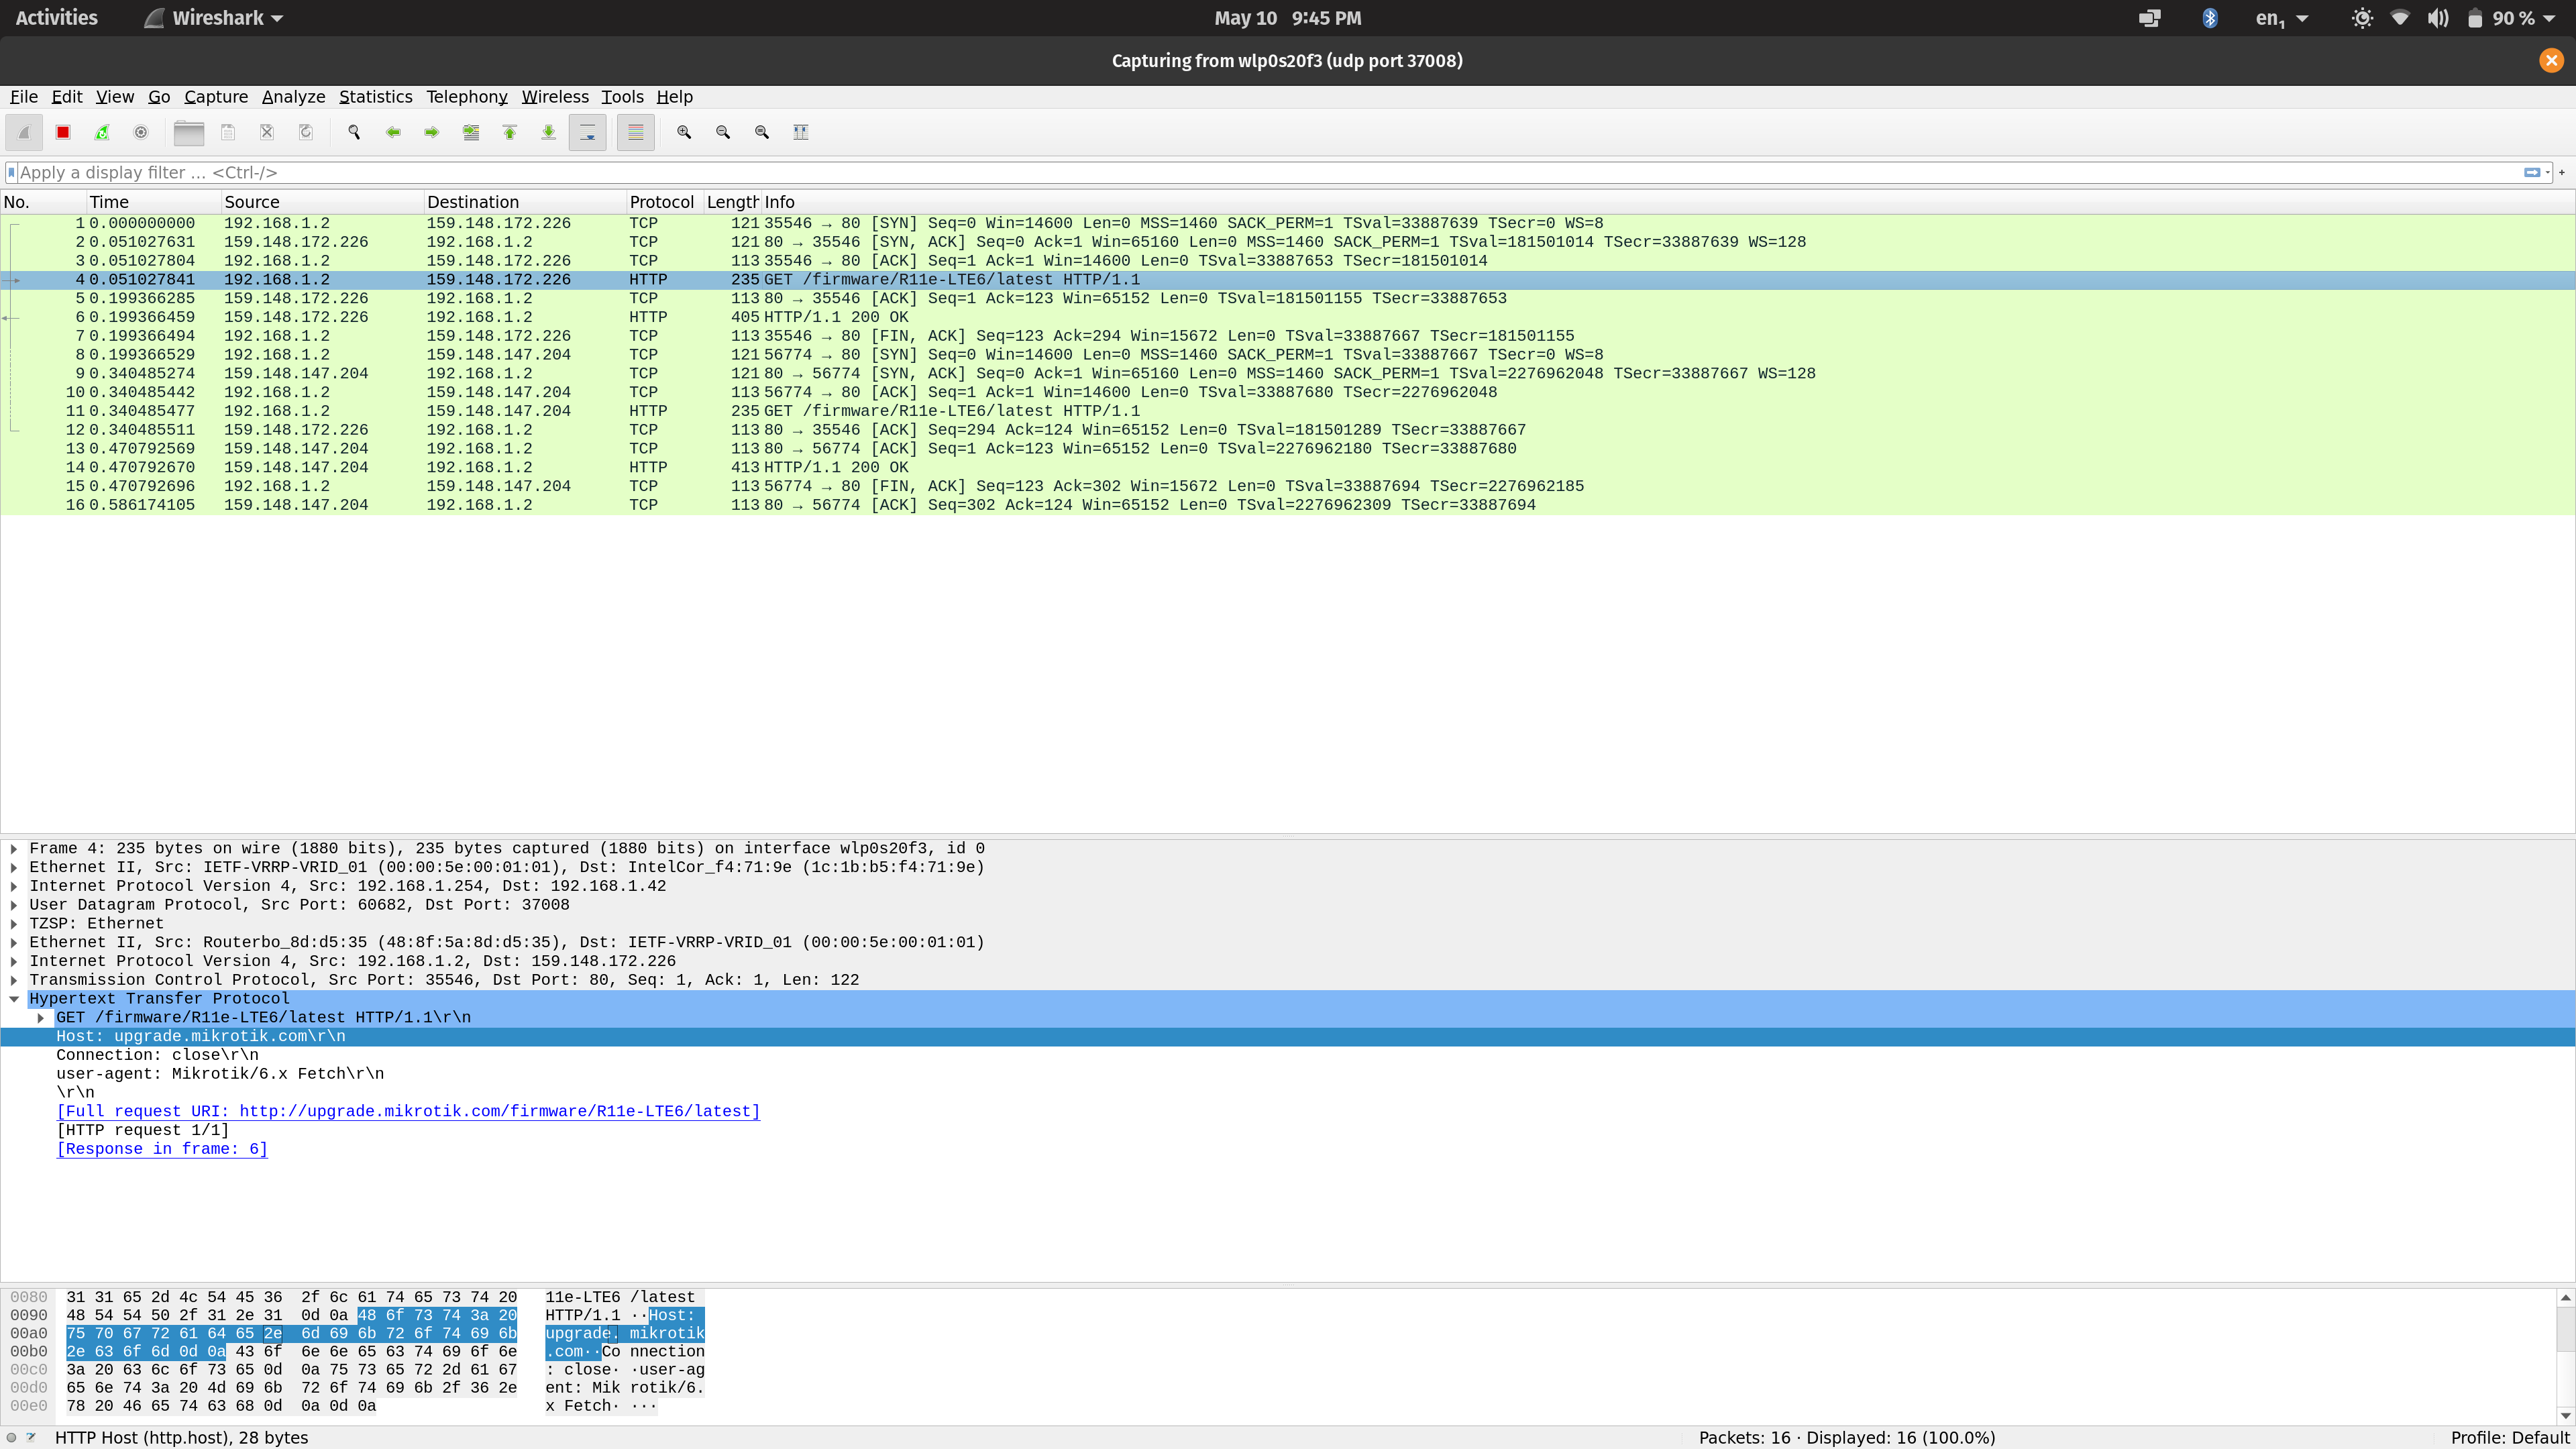 Screenshot of Wireshark sniffing packets sent by the Mikrotik router